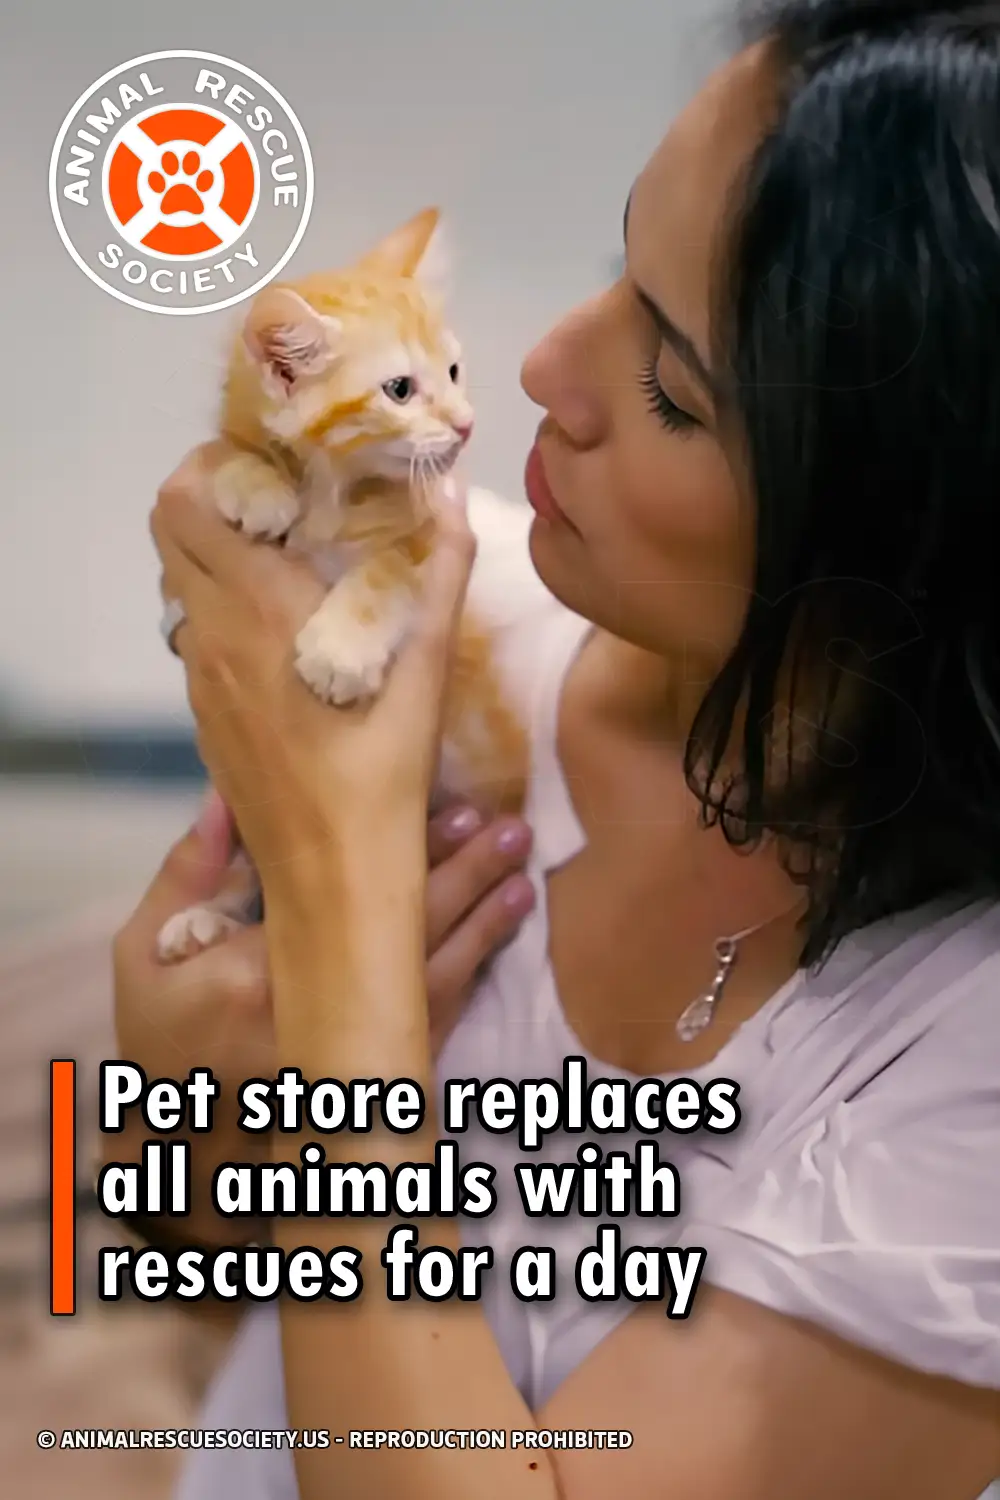 Pet store replaces all animals with rescues for a day